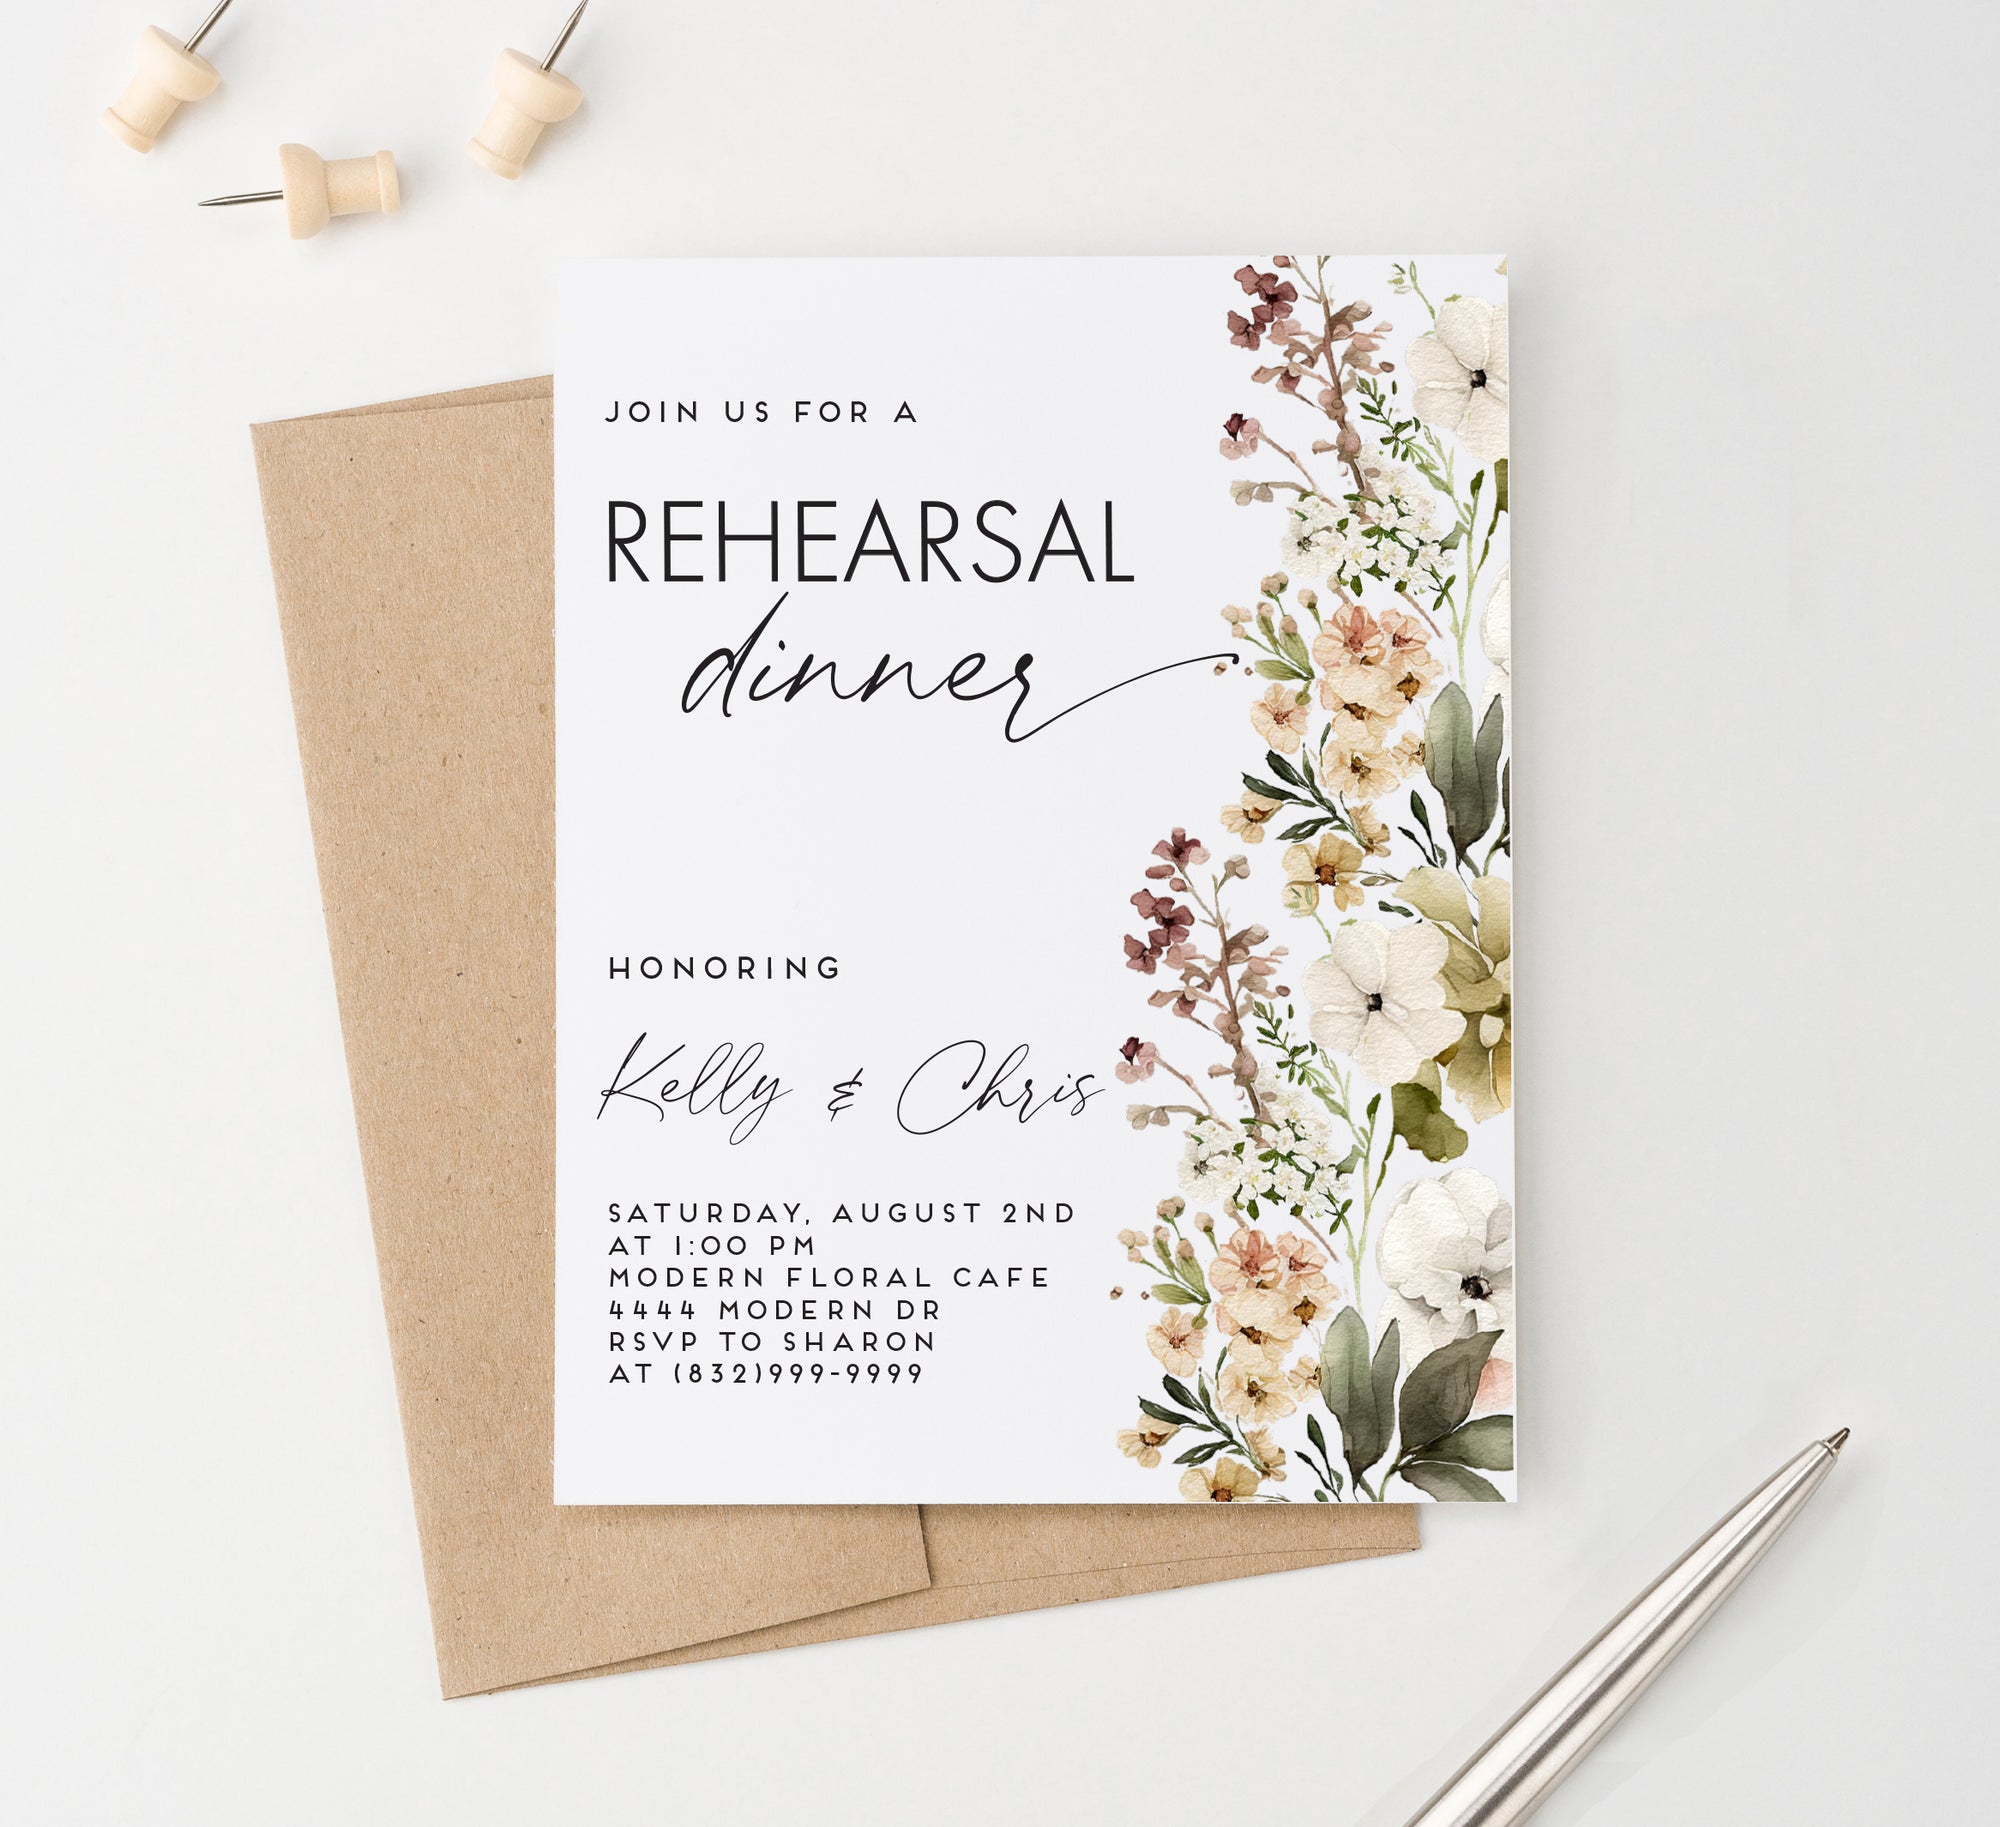 Minimalist Rehearsal Dinner Party Invitations With Florals